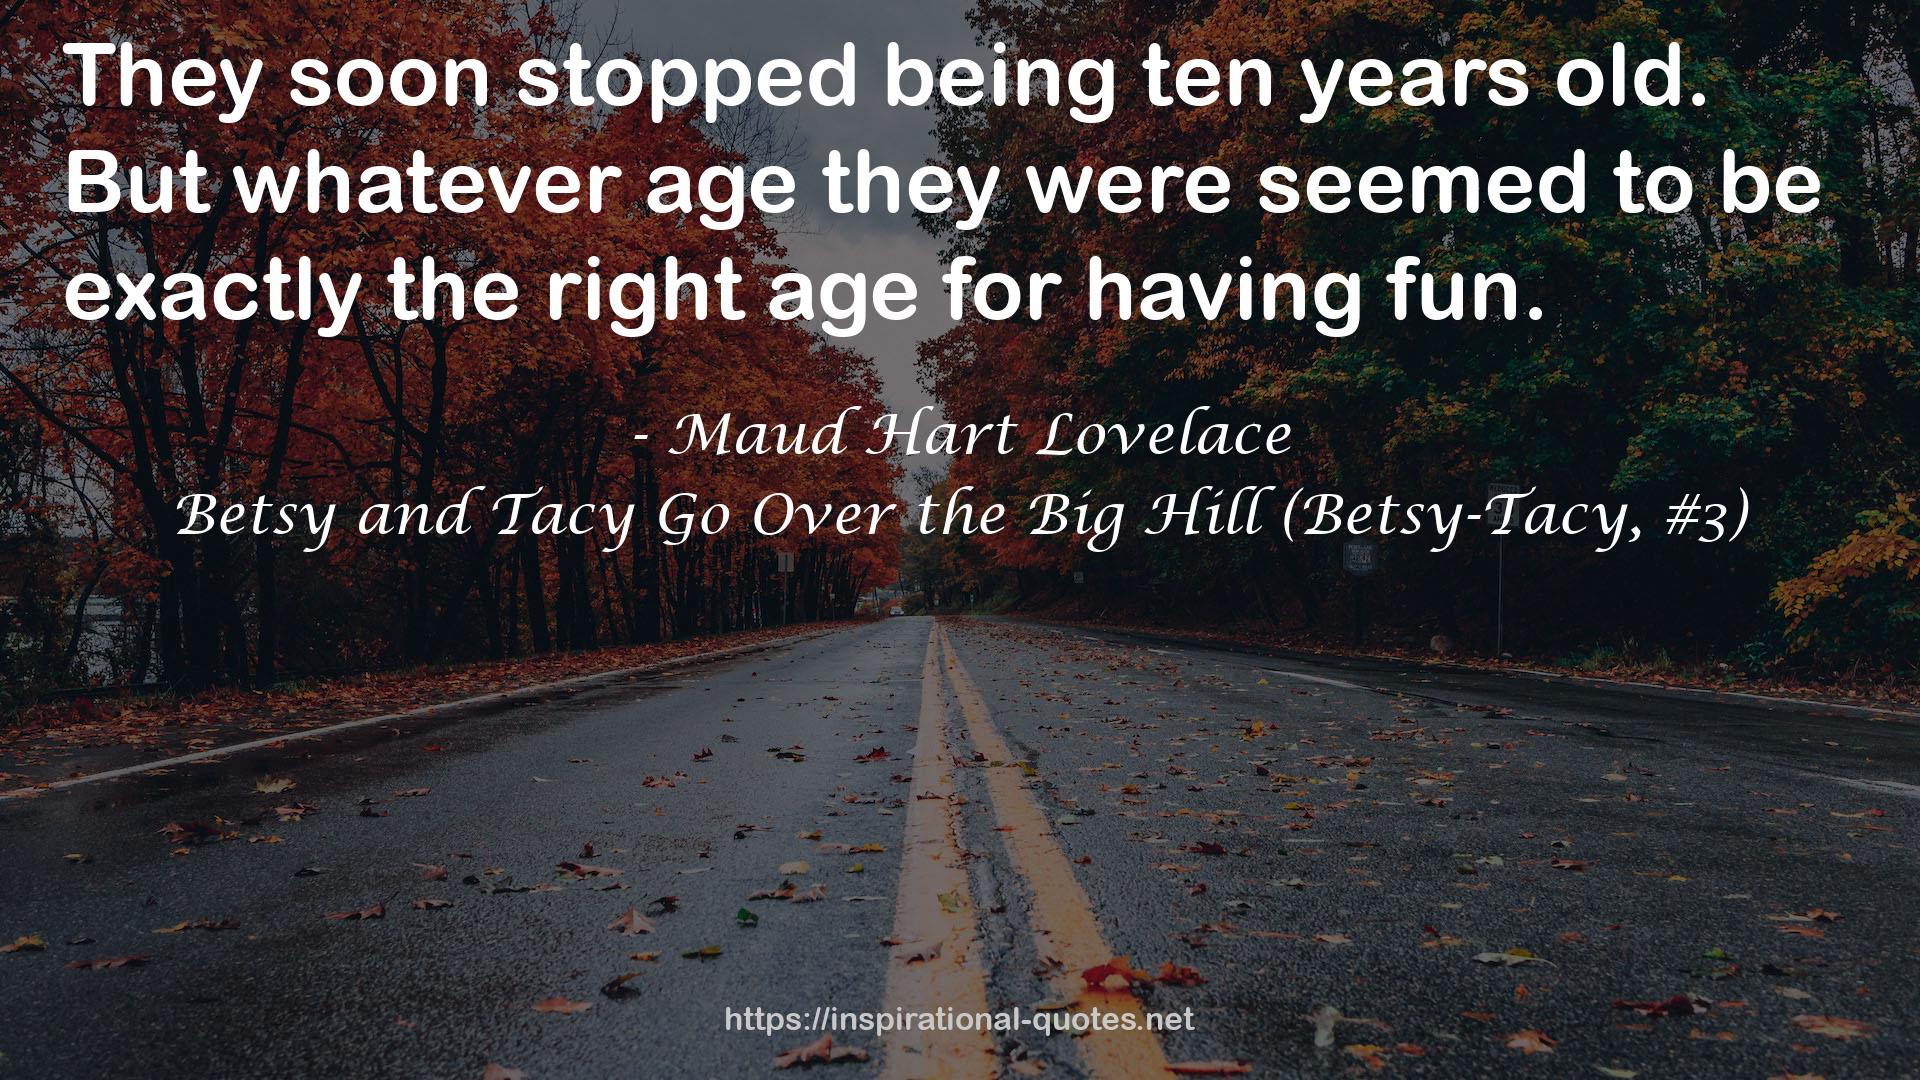 Betsy and Tacy Go Over the Big Hill (Betsy-Tacy, #3) QUOTES